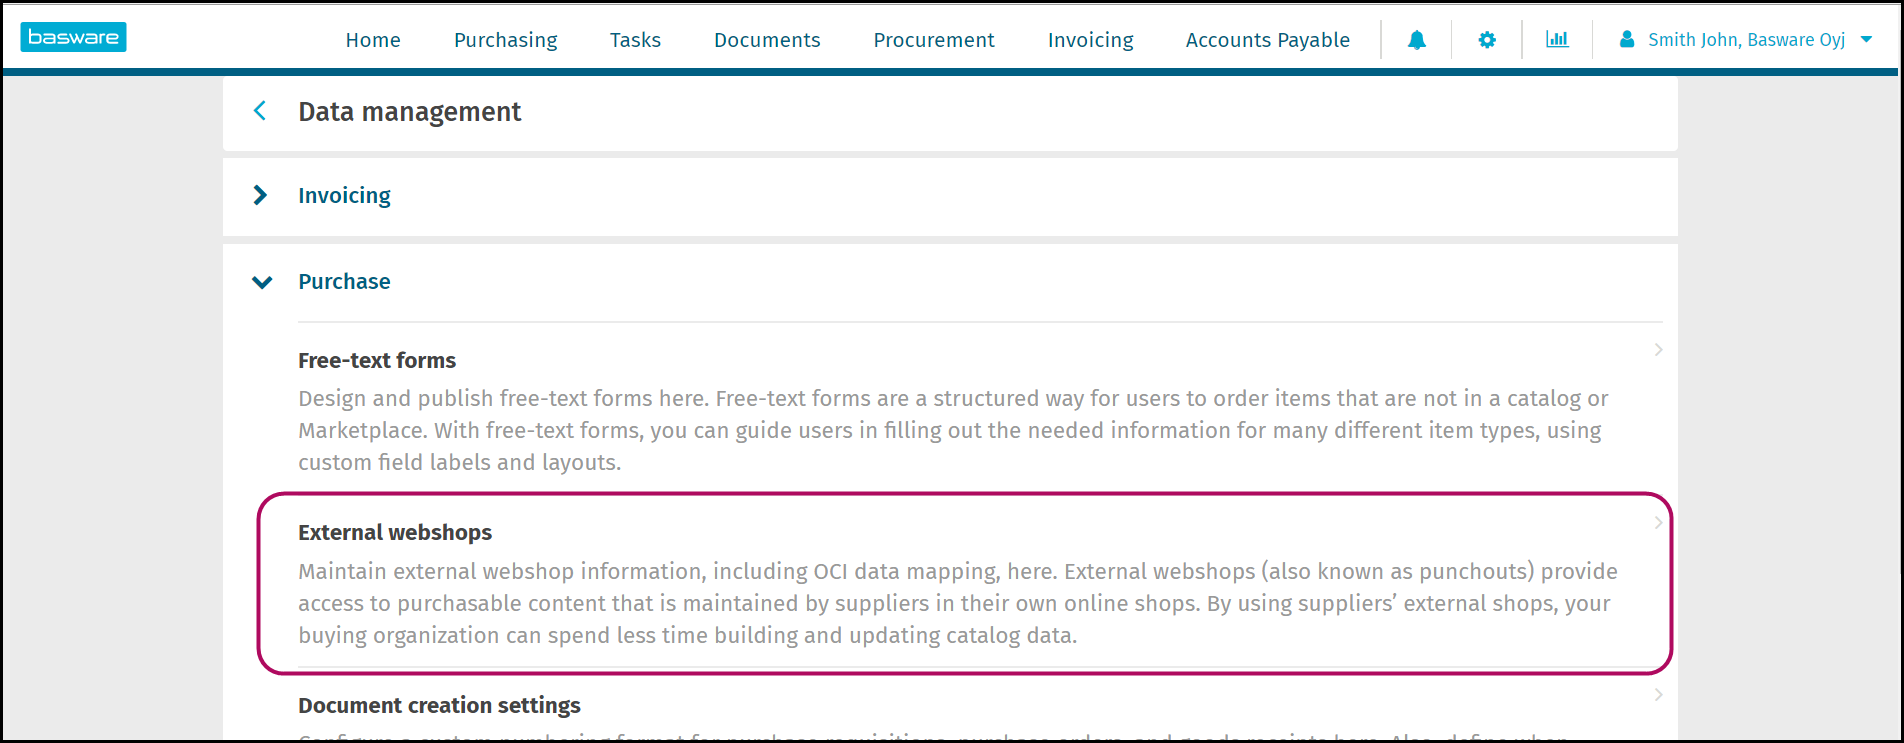 From the Data Management page, click External Webshops.